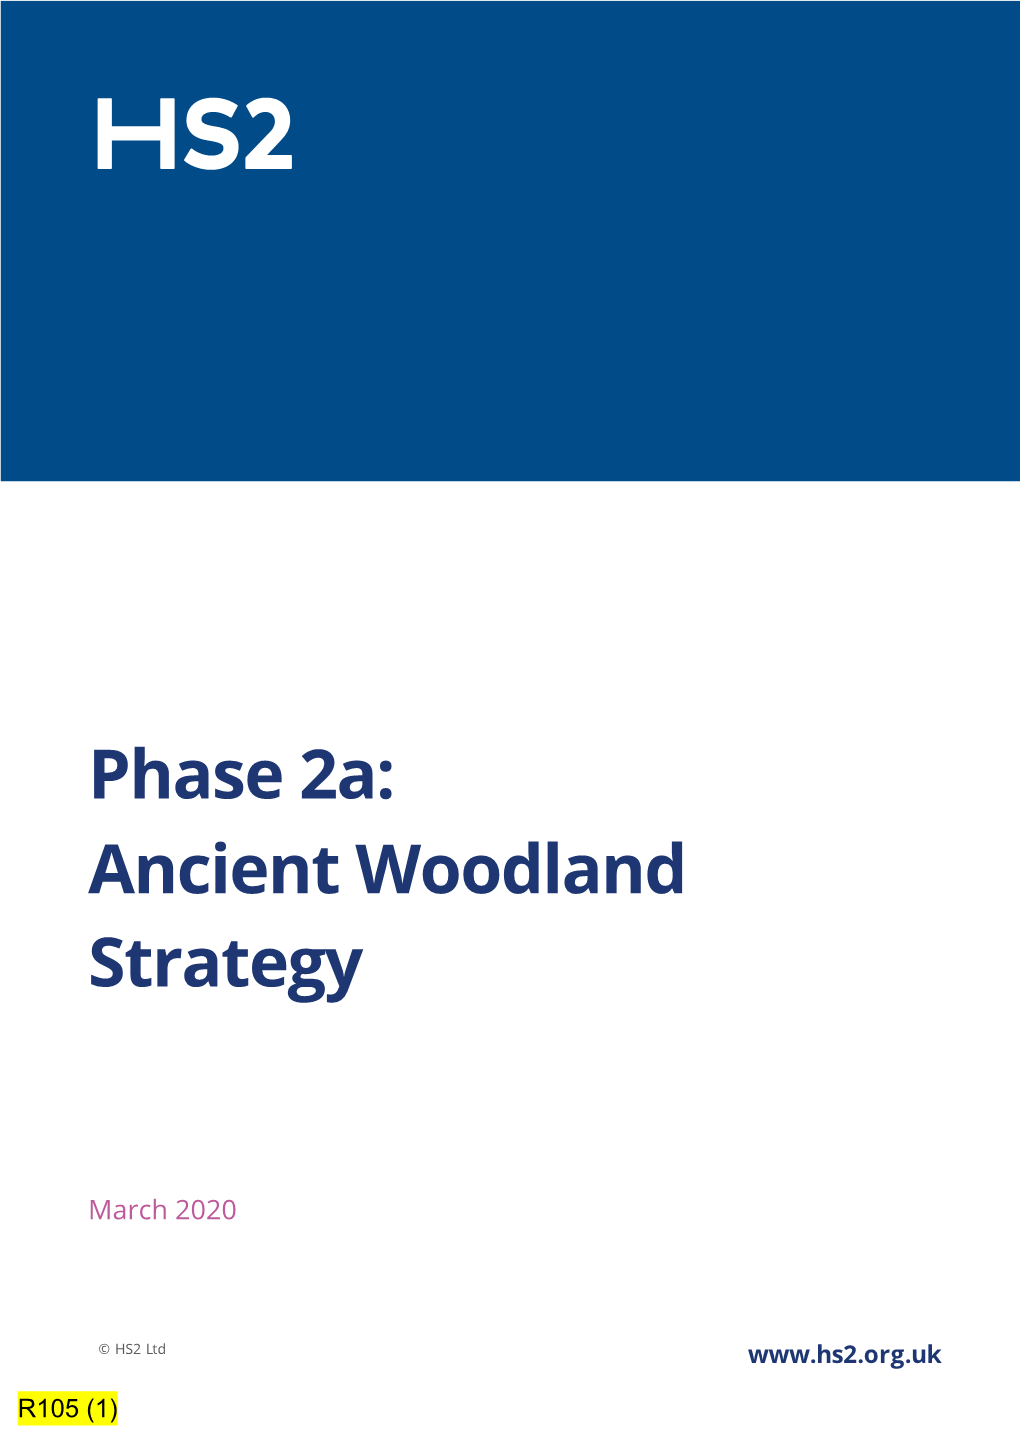 Phase 2A: Ancient Woodland Strategy